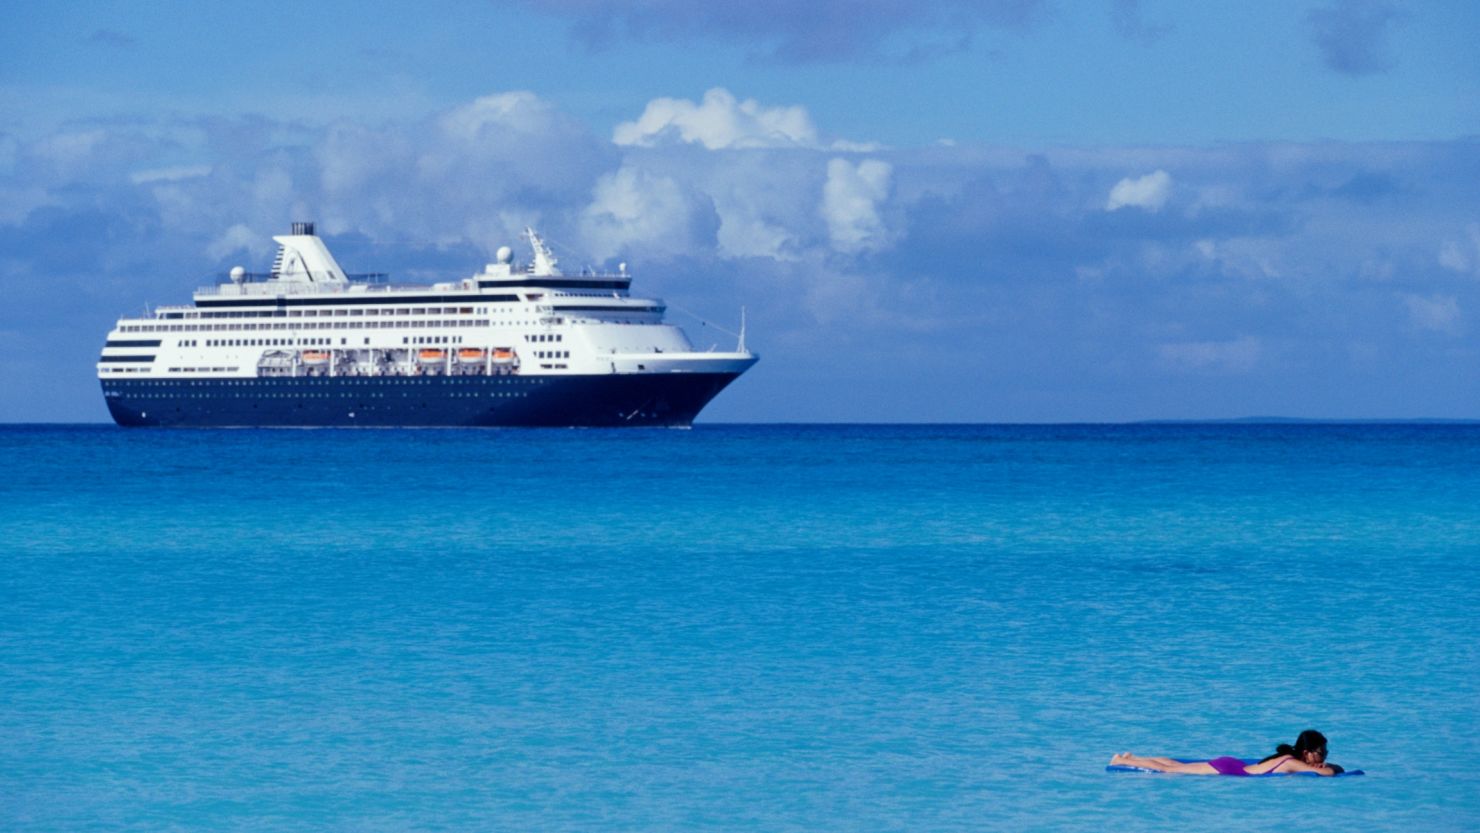 For many people, the Caribbean is the ultimate cruise experience. But river cruising is also hot for 2012, experts say.